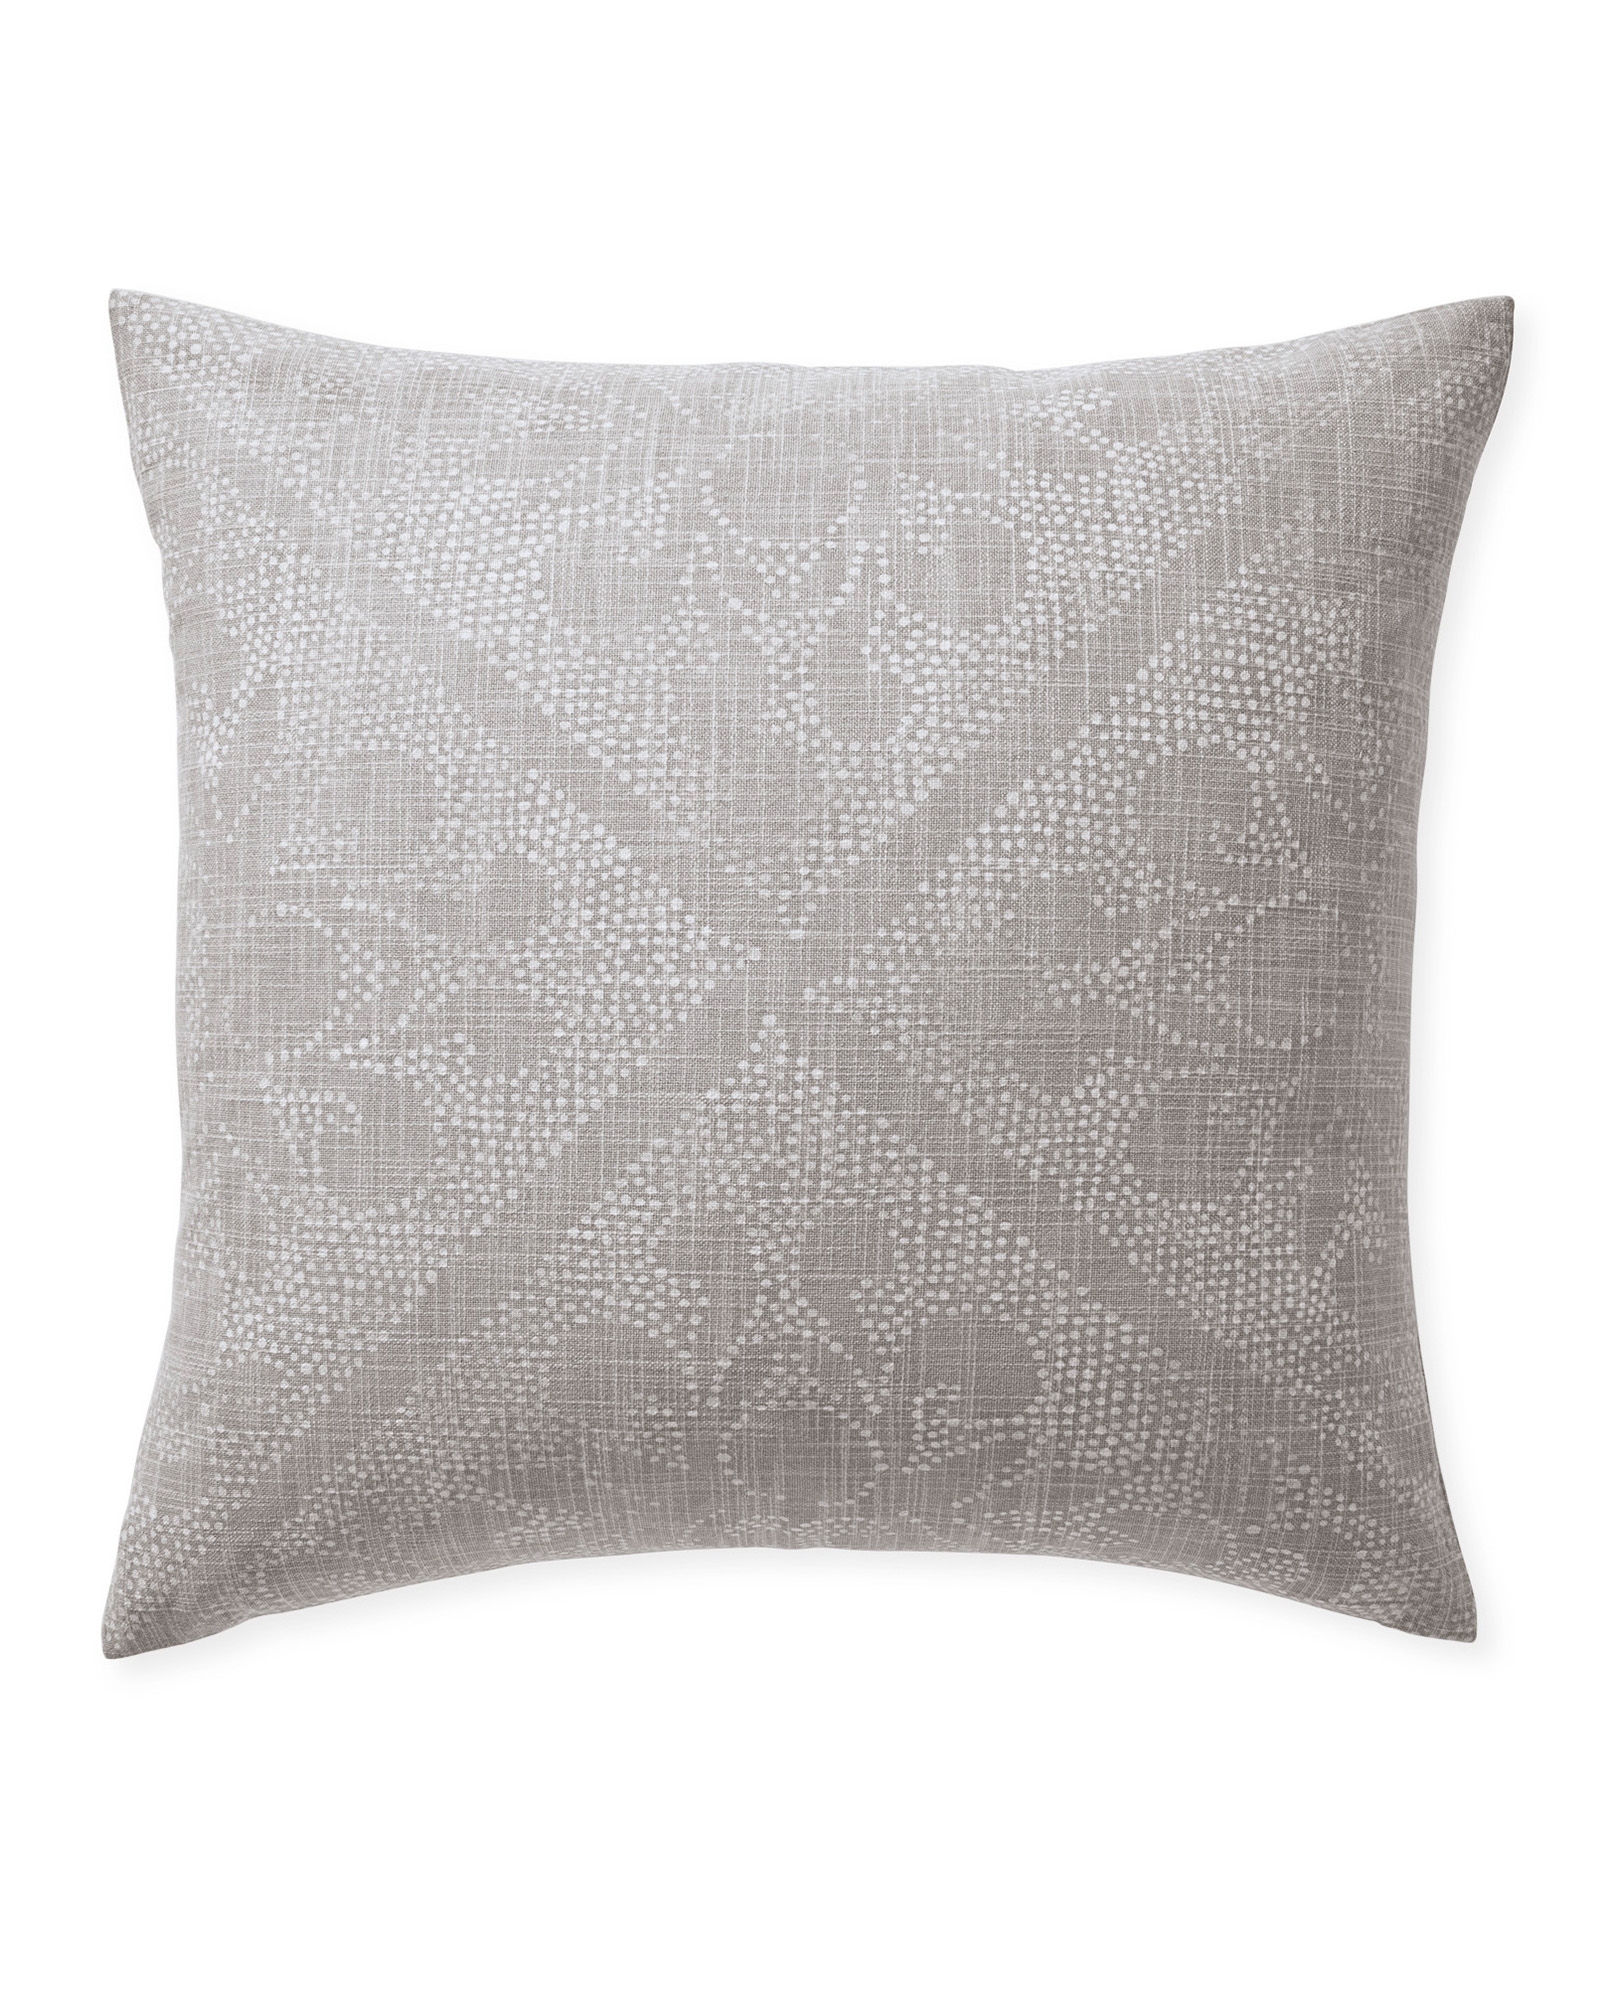 Camille Scroll 24"SQ. Pillow Cover - Smoke - Insert sold separately - Image 0